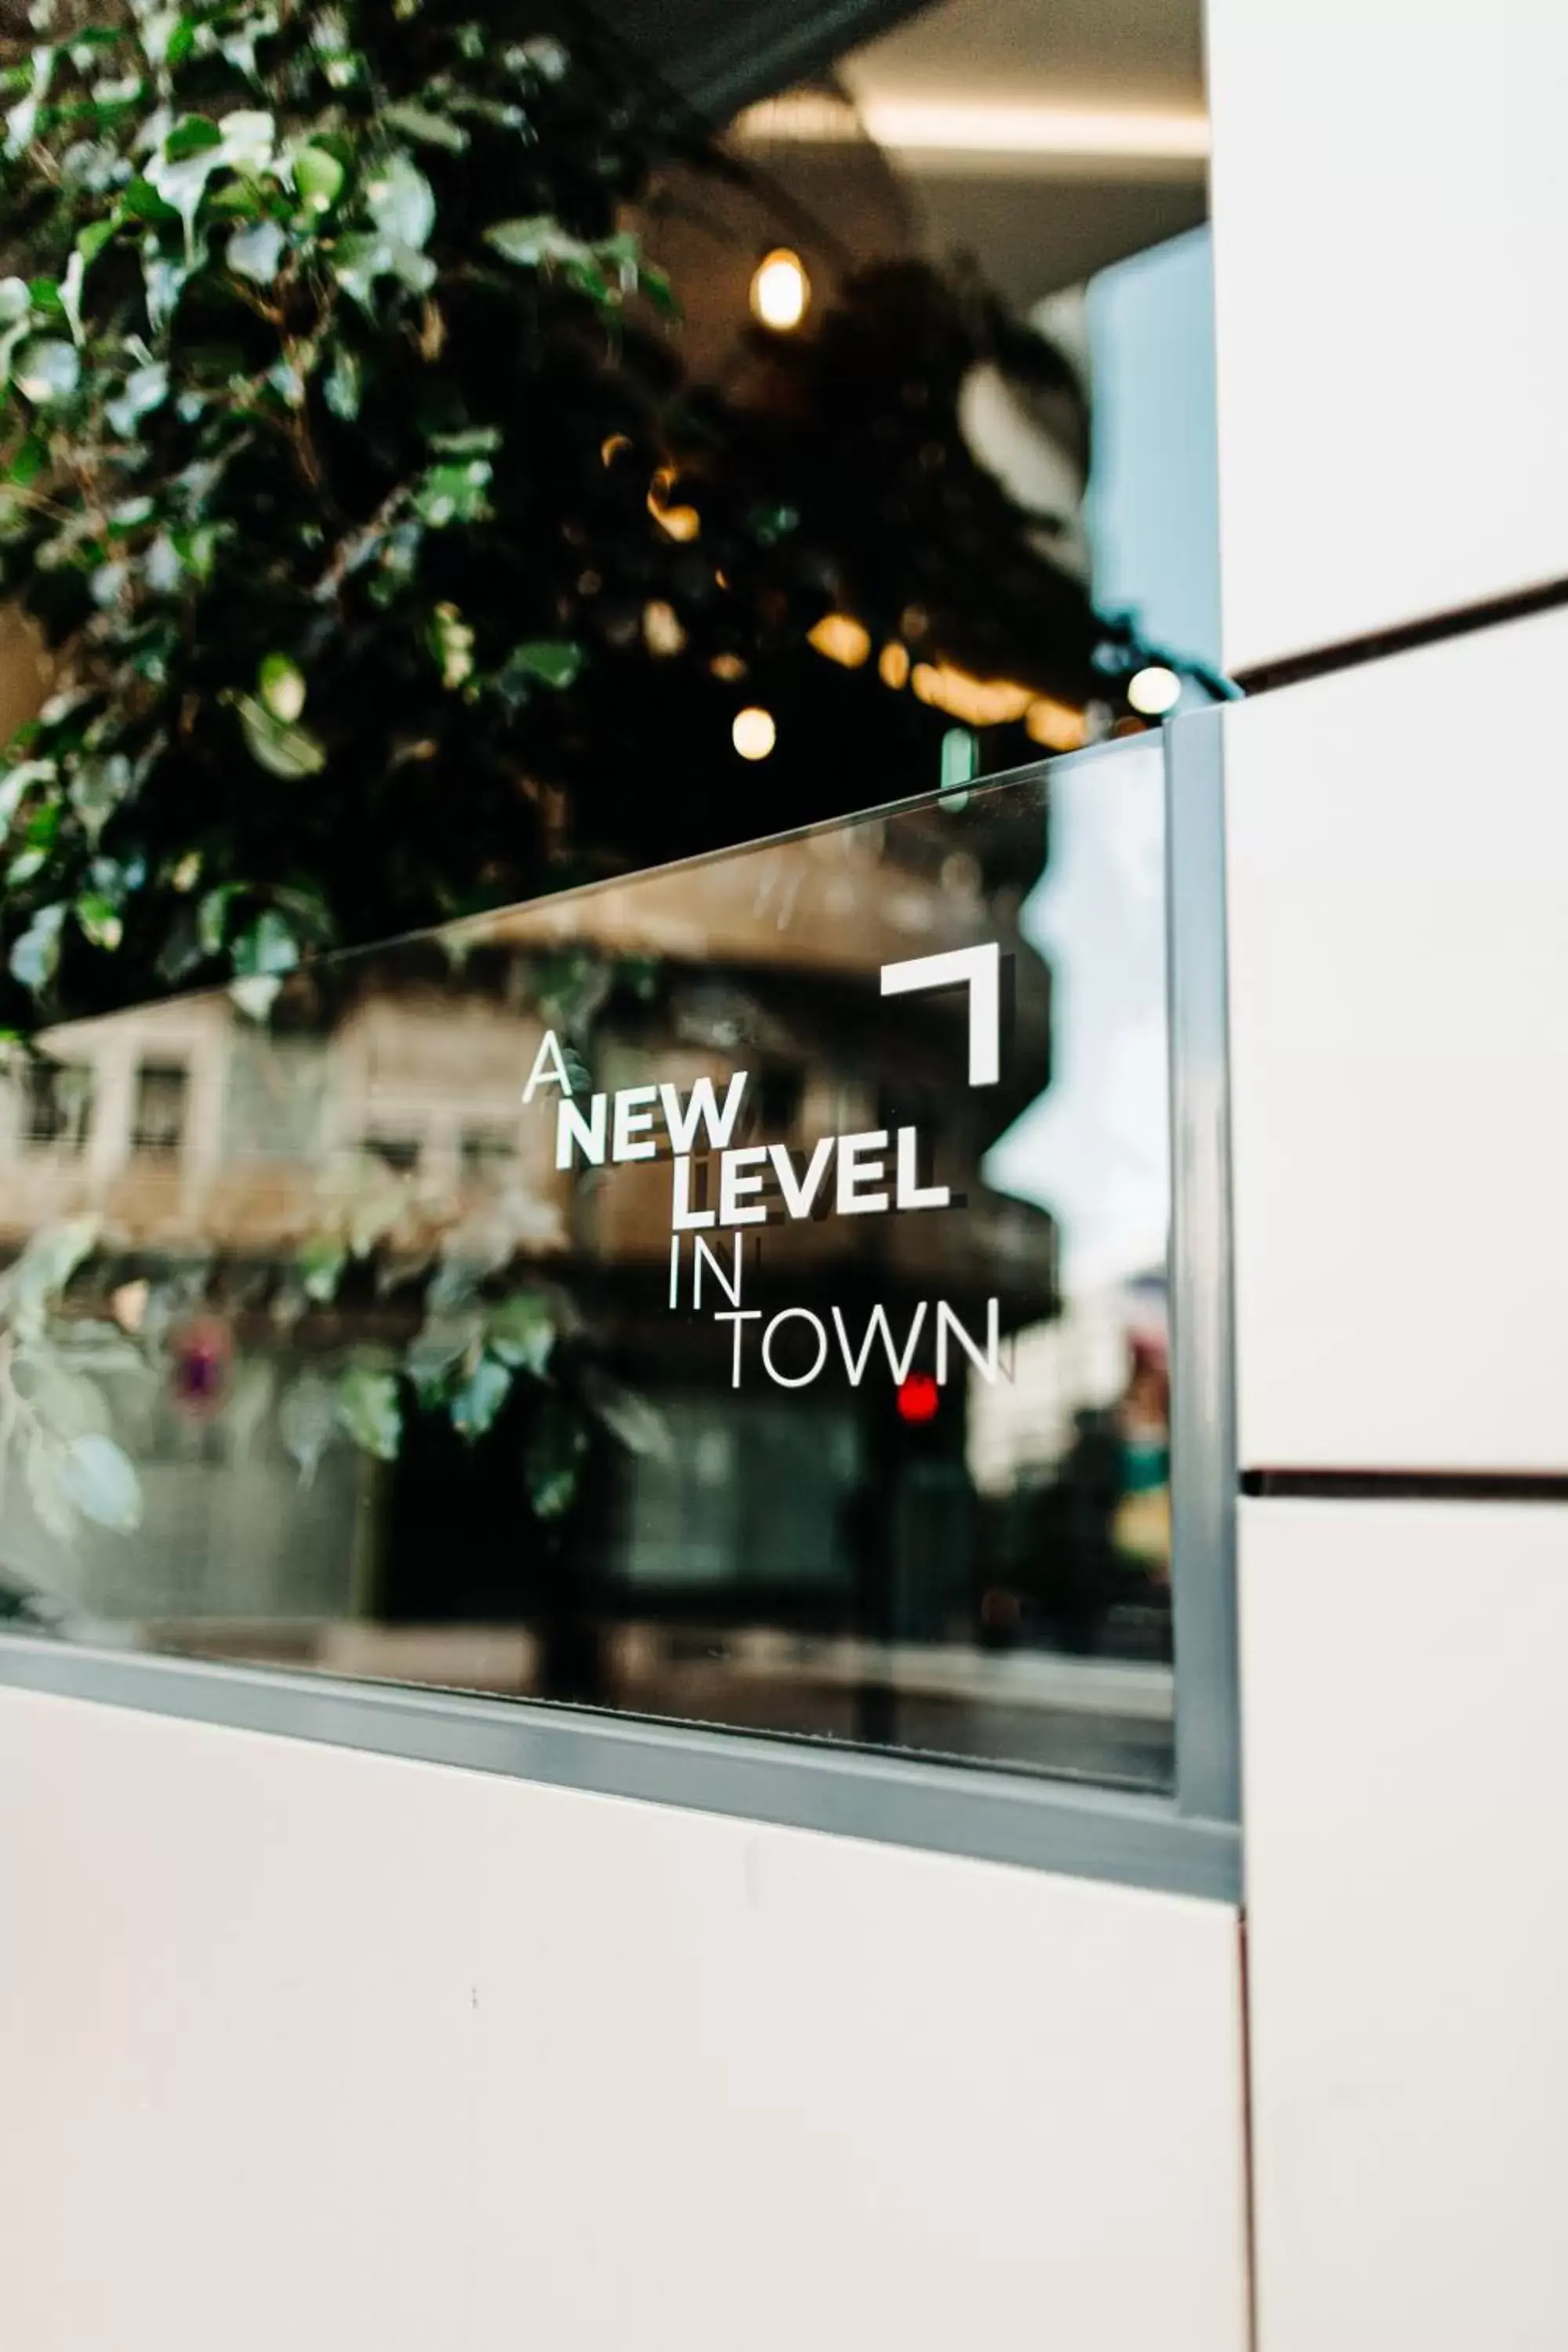 Property building in Next Level Premium Hotels